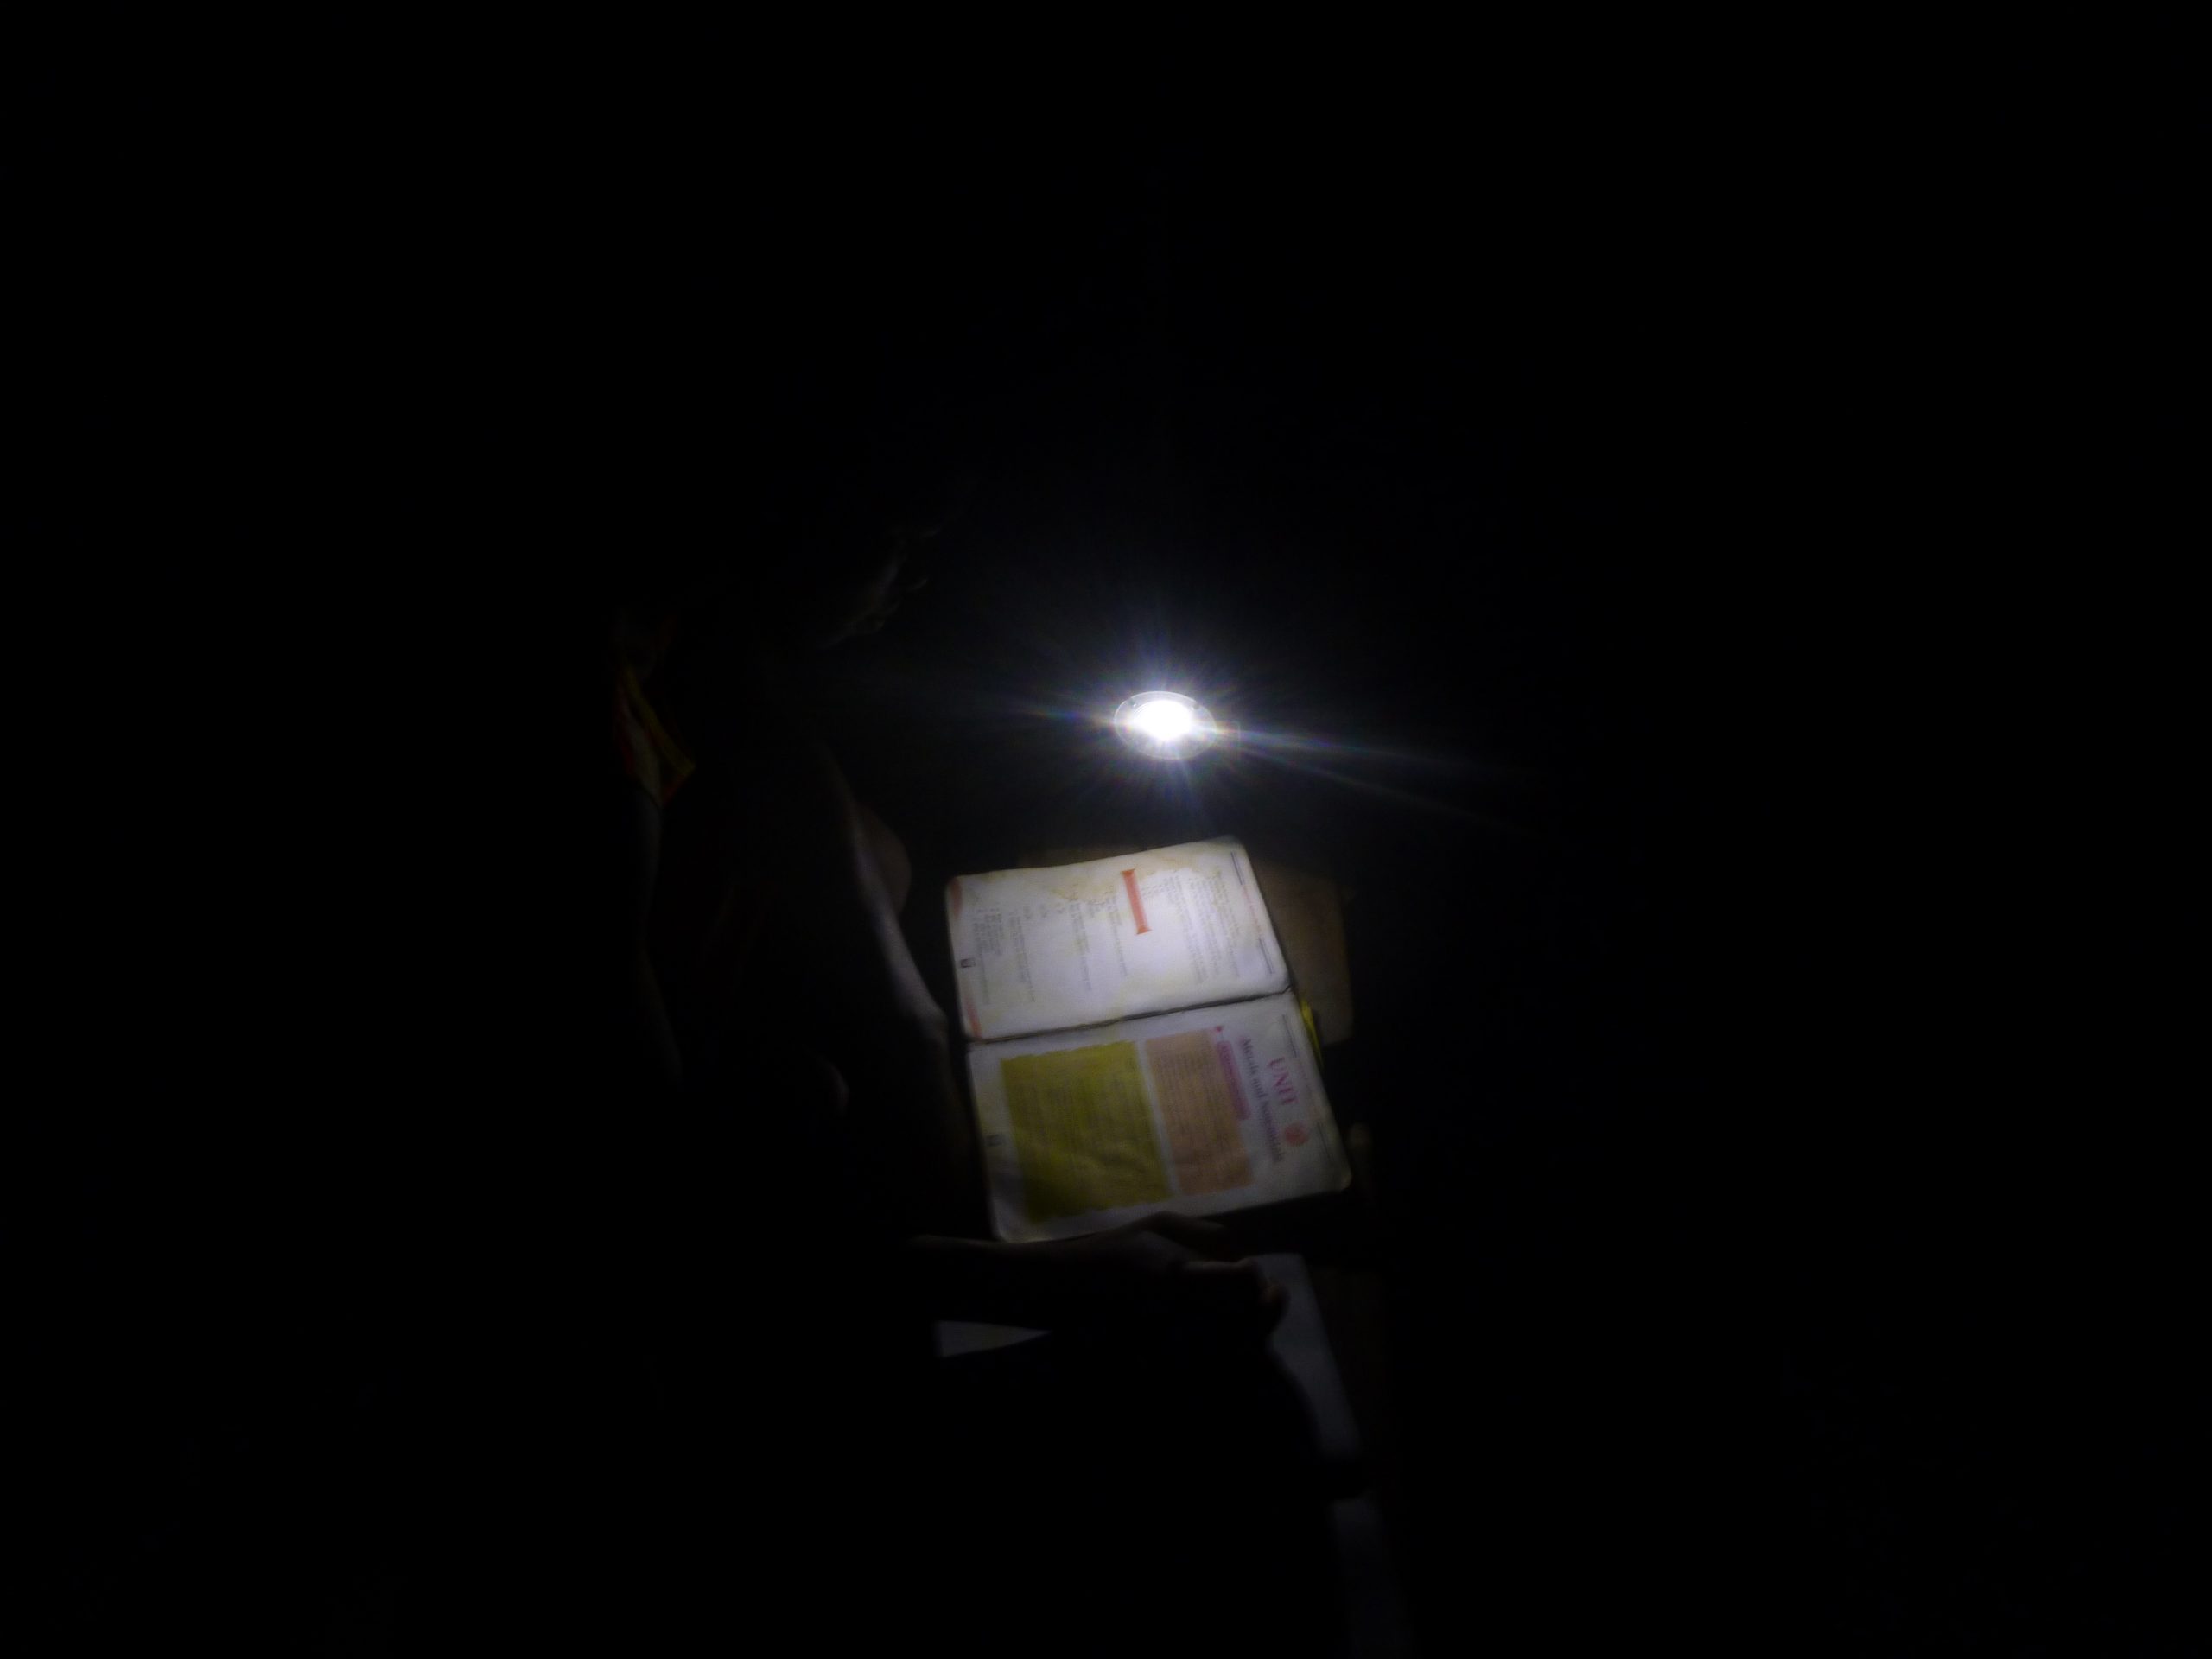 As a volunteer, I took this picture of this student learning with a solar light at night.